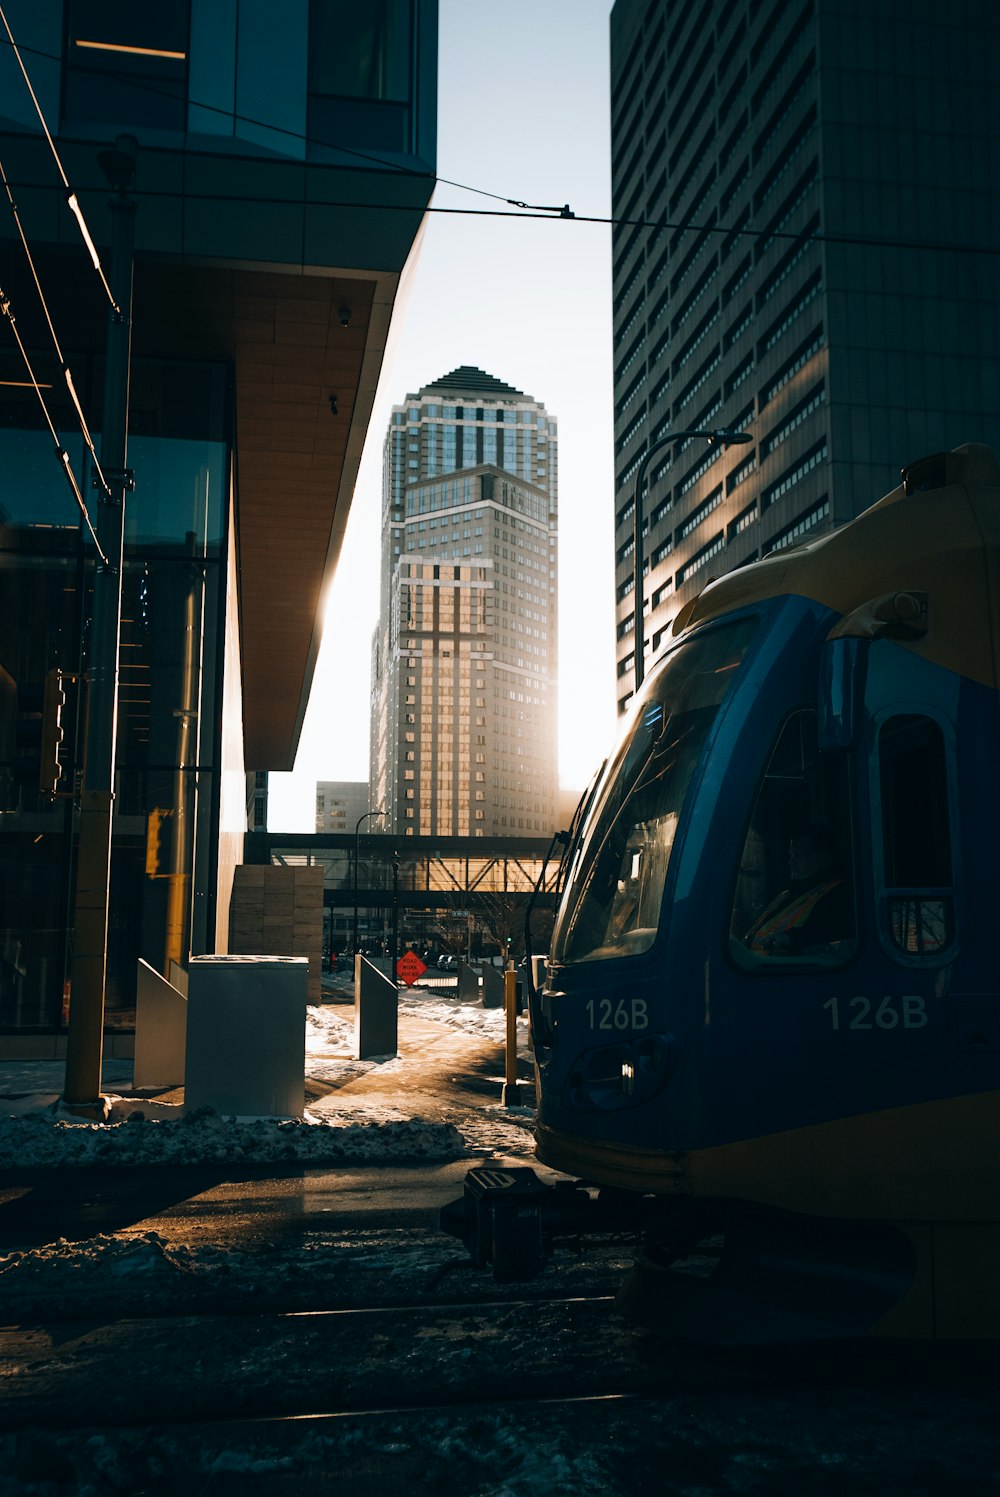 a blue and yellow train traveling past tall buildings